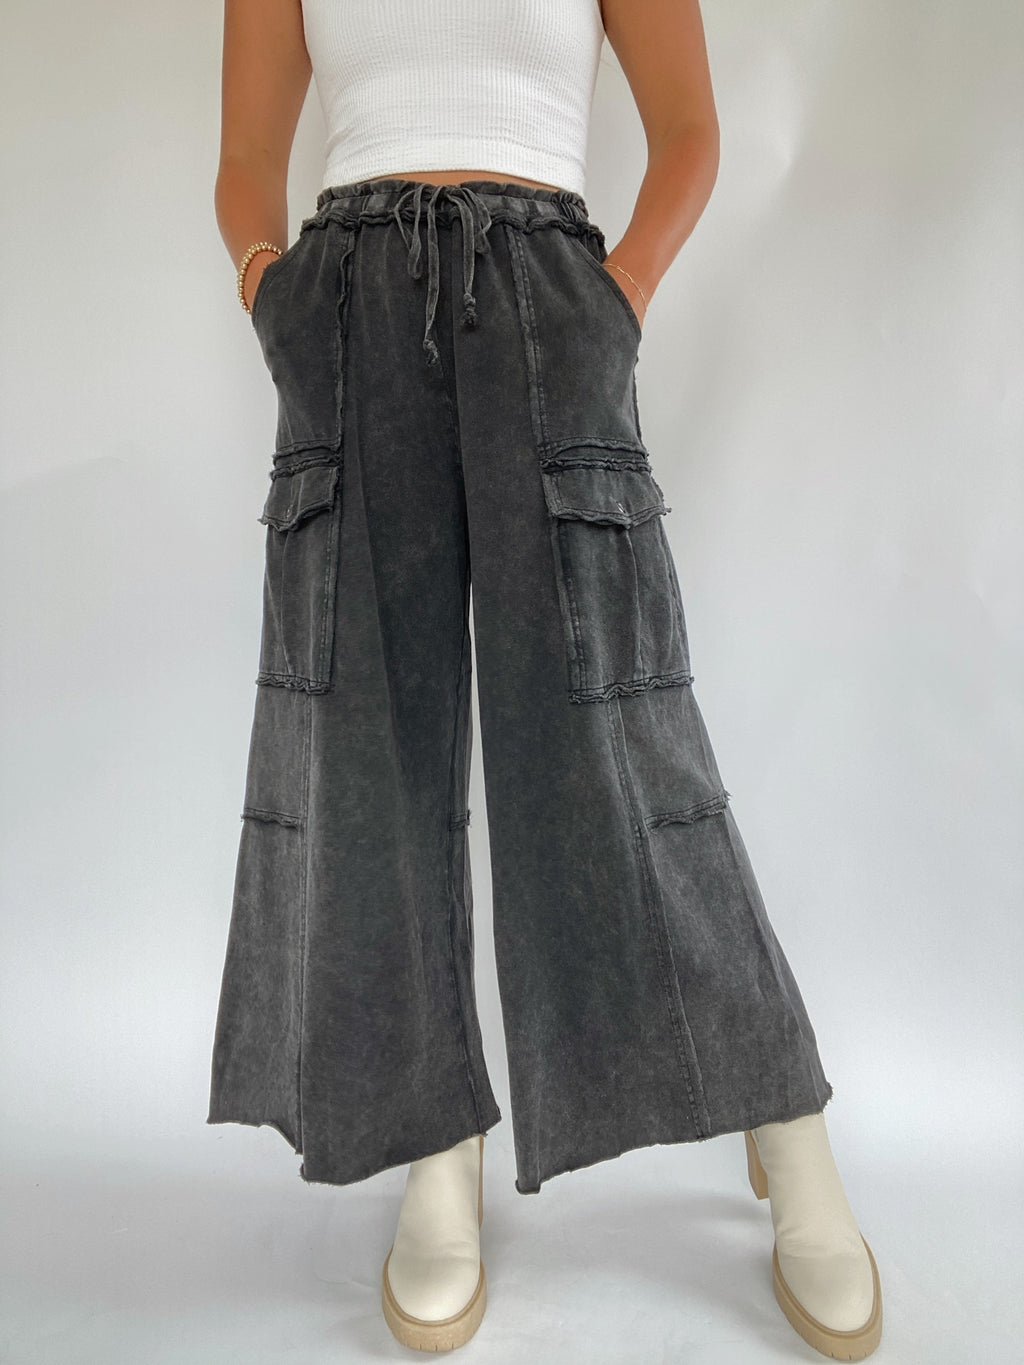 Middle Of The Road Pants - Black